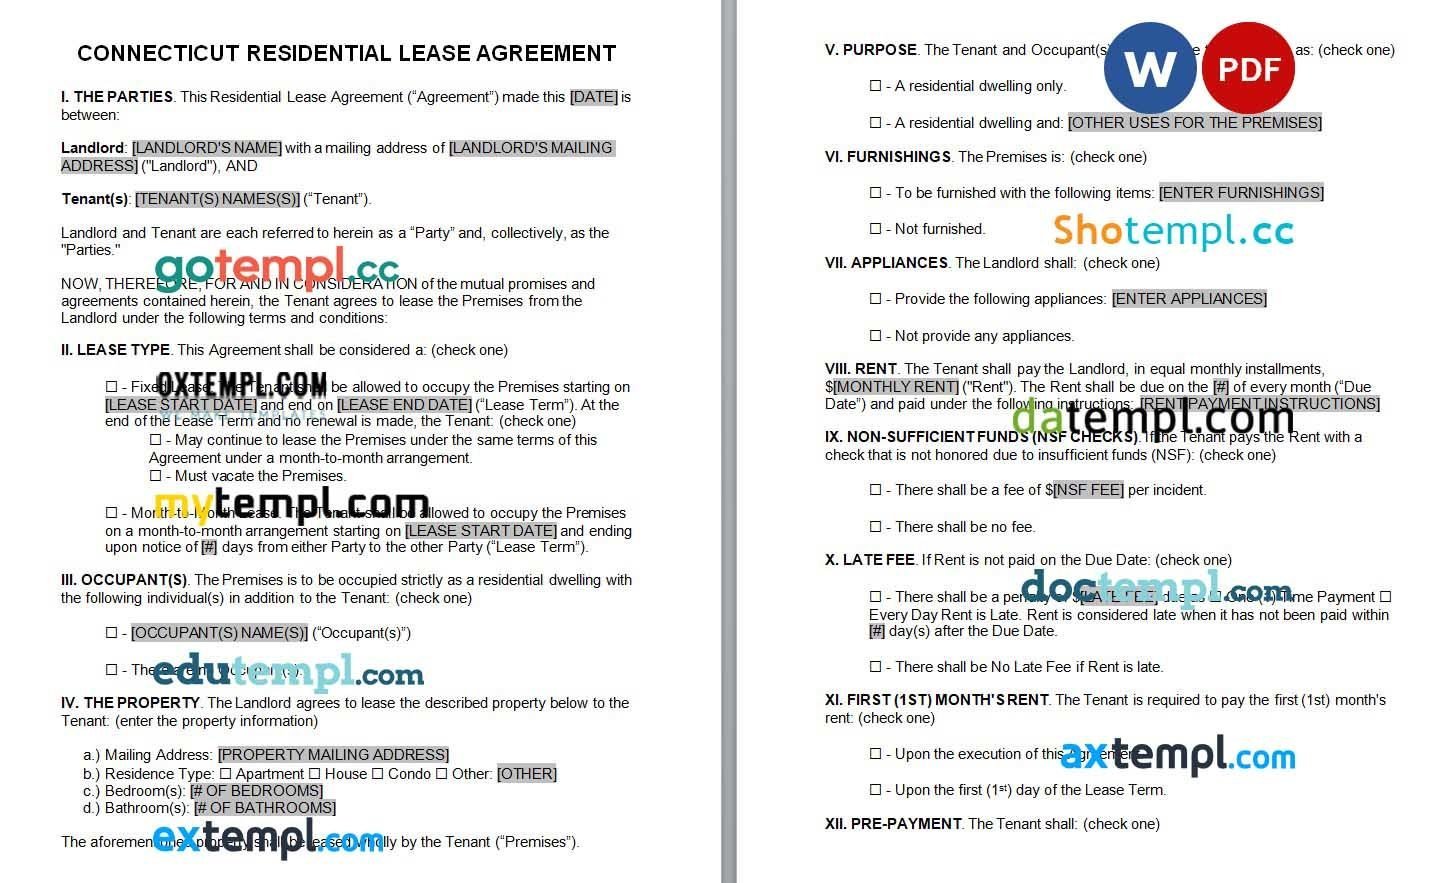 Connecticut Standard Residential Lease Agreement Word example, fully editable